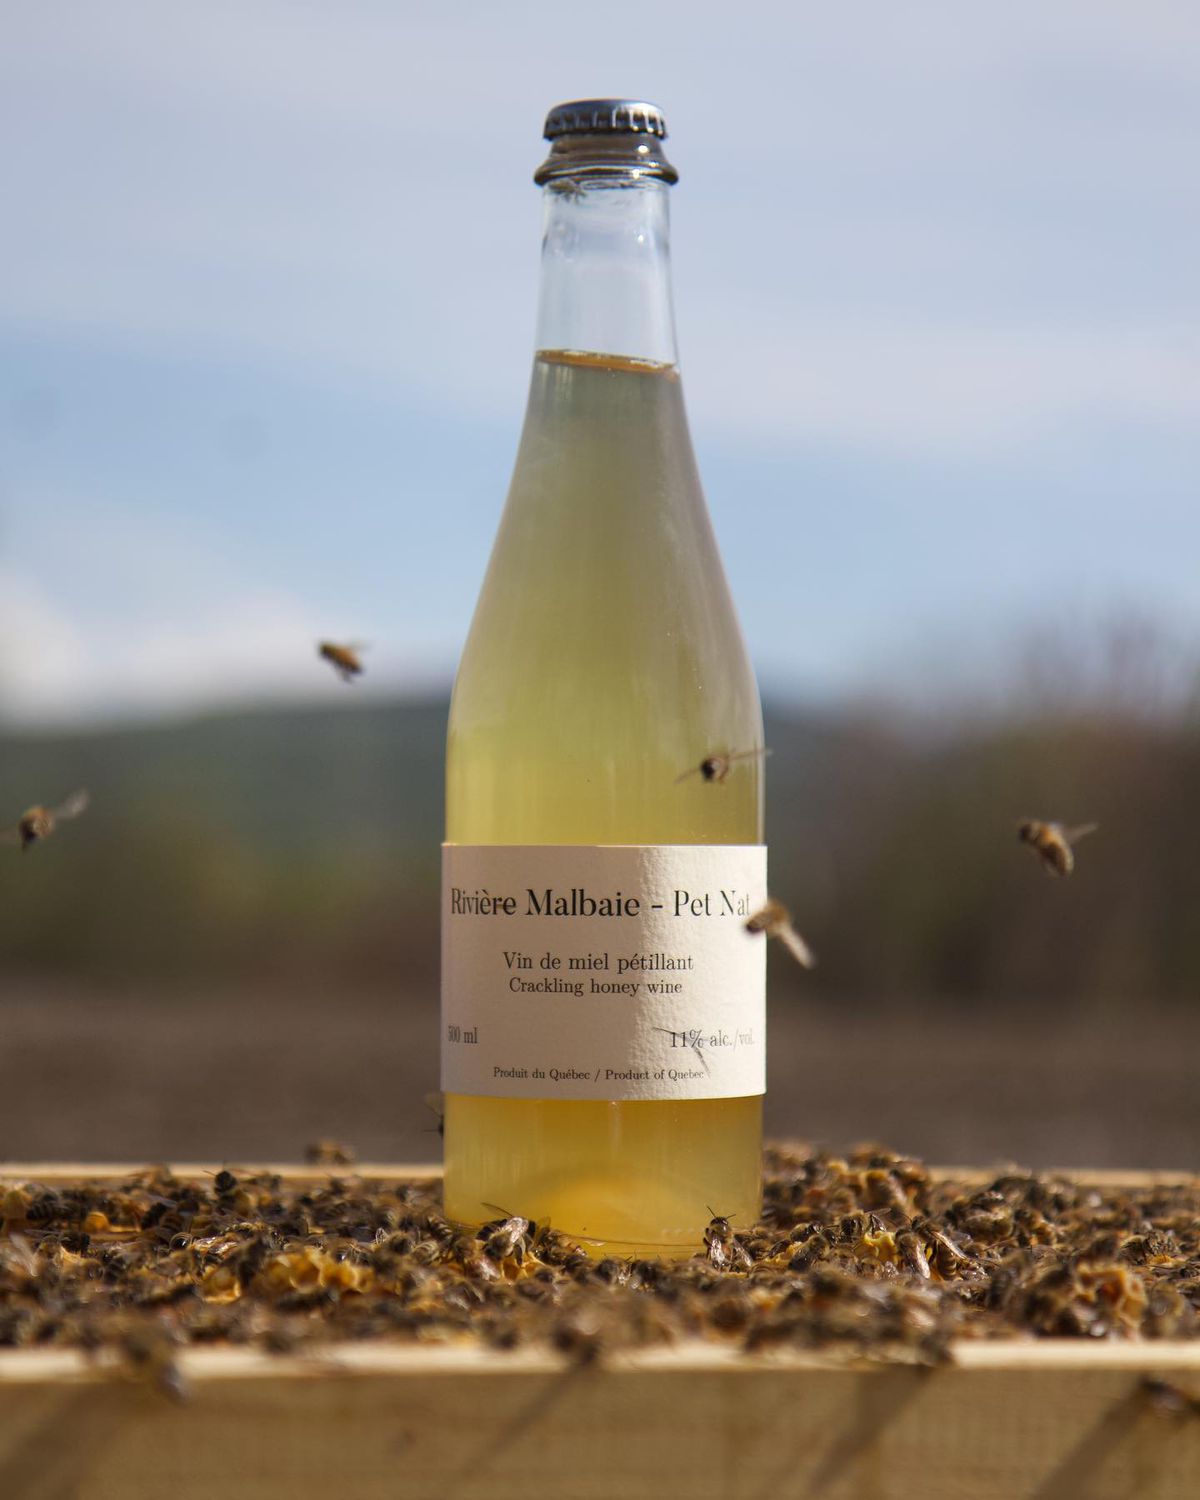 a bottle of lightly coloured alcohol on top of a beehive and surrounded by bees.